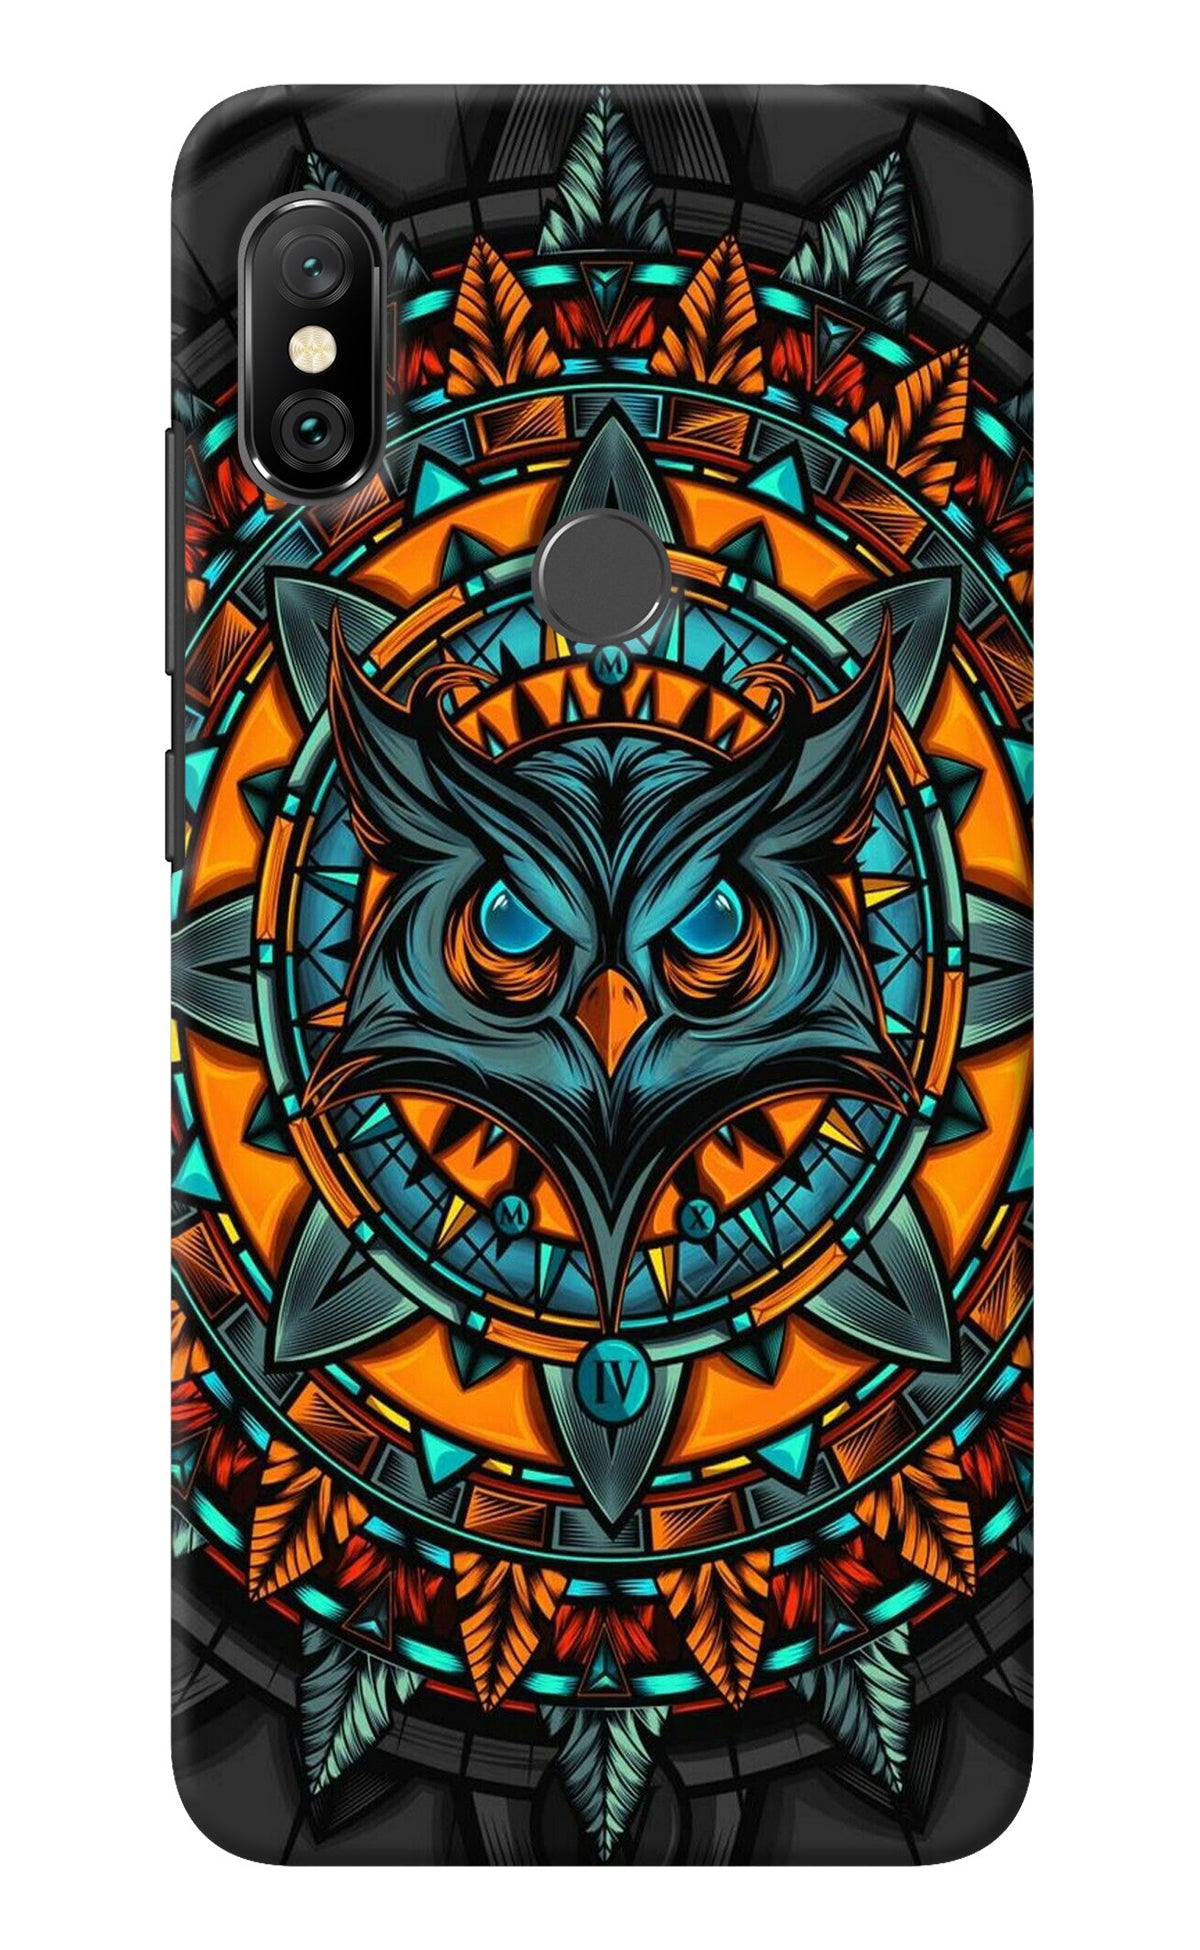 Angry Owl Art Redmi Note 6 Pro Back Cover